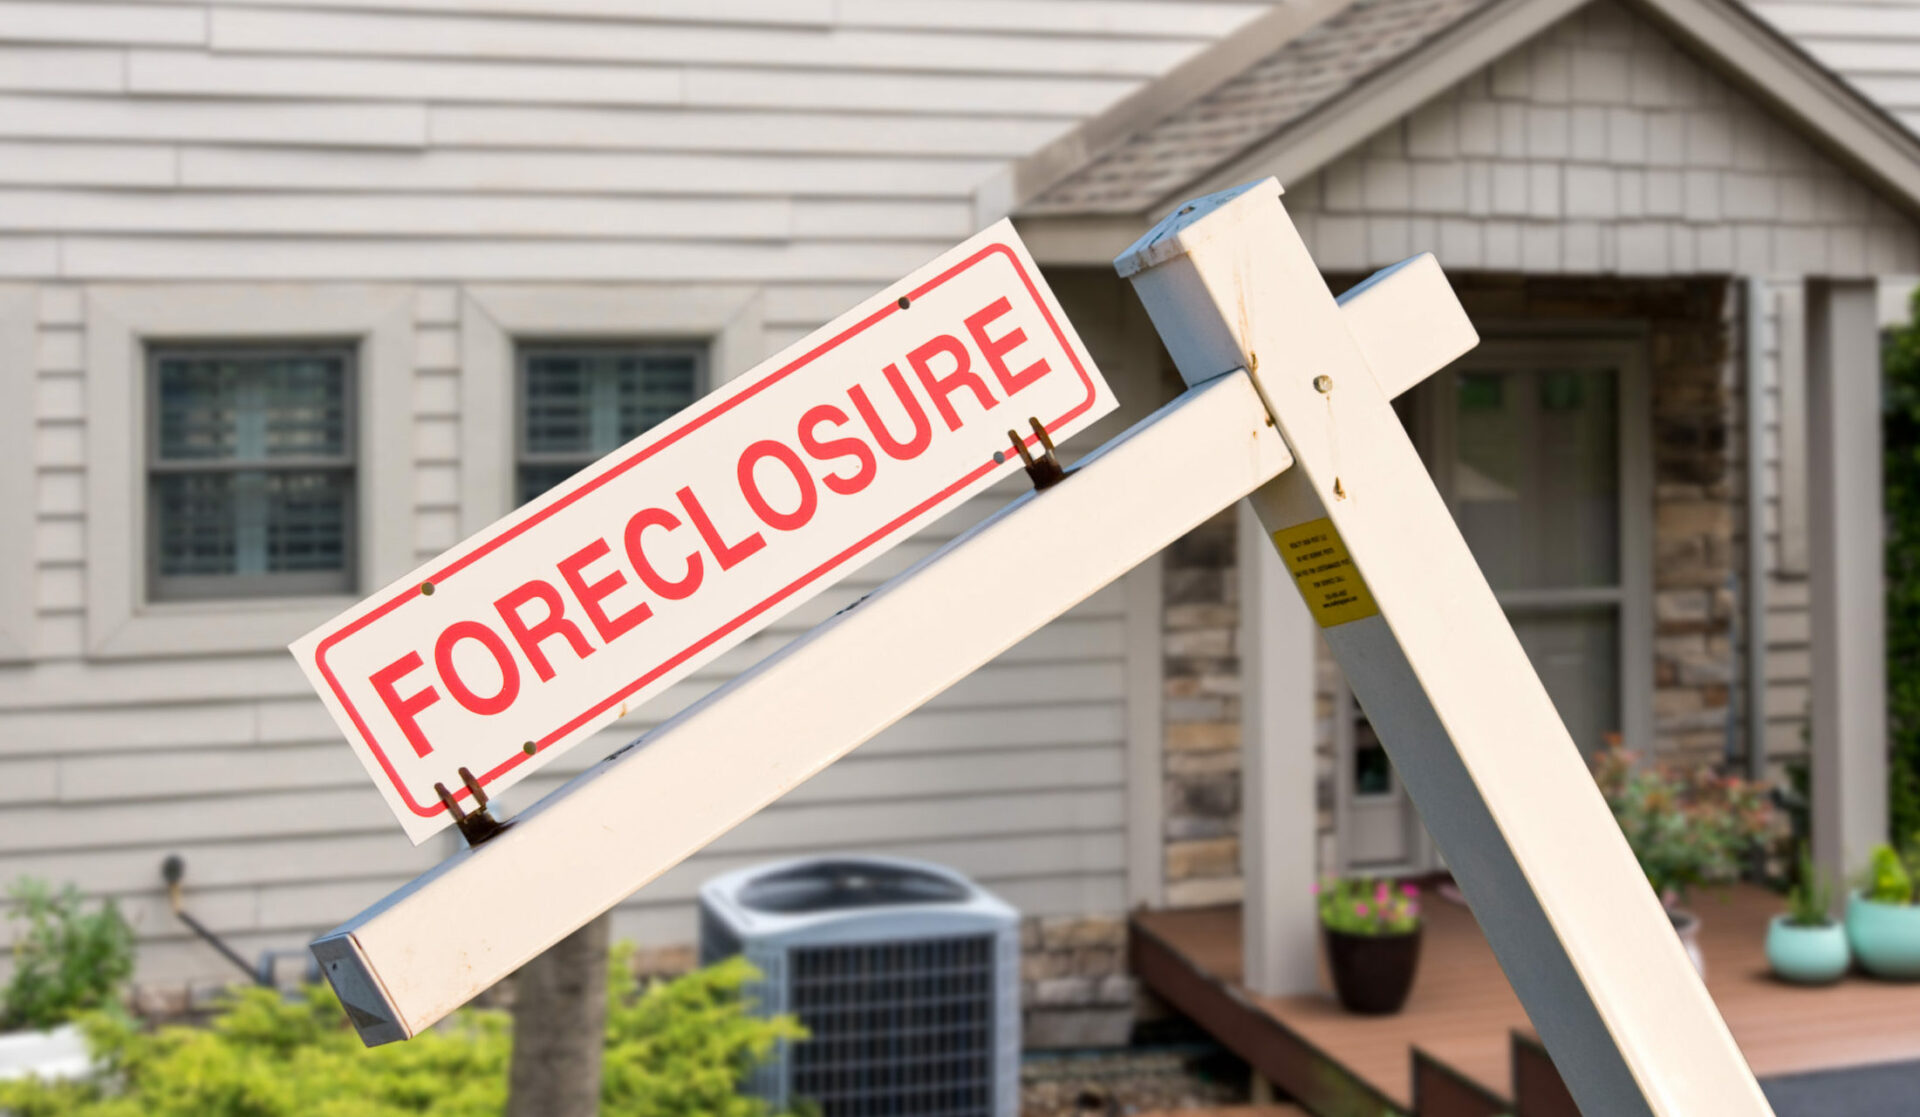 Foreclosure Suspended For Homeowners Seeking Relief, FHA Says